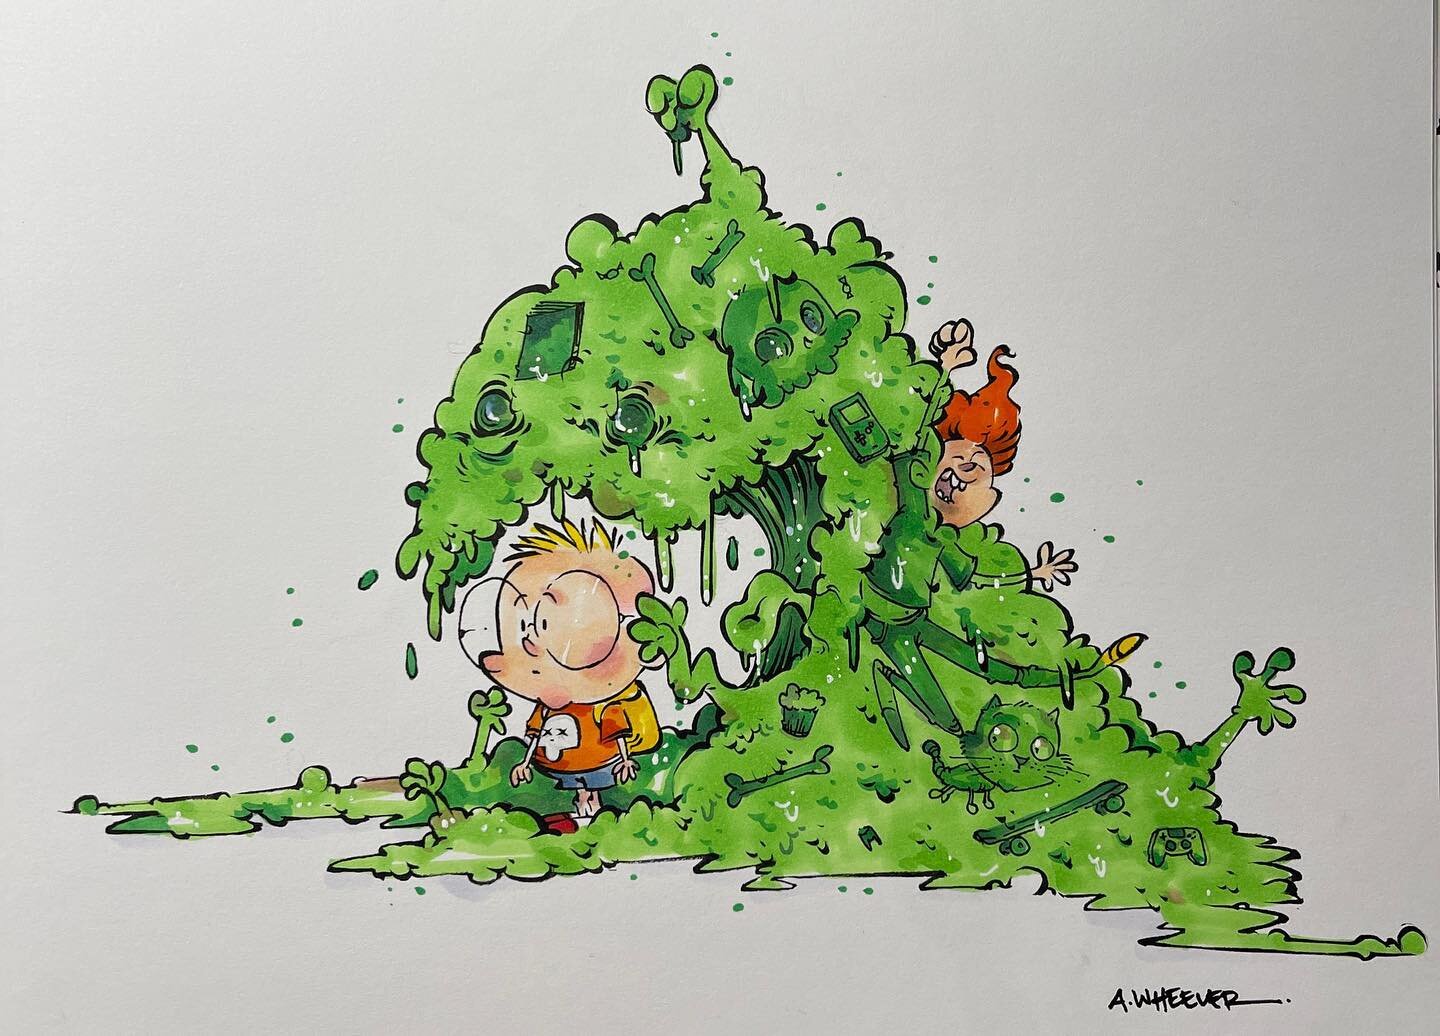 Gil vs Slime.  Allergy season approaches and remember to cover your sneezes or you may unleash a bacteria monster that will destroy an entire city.  #anthonywheelerart #kidlit #childrensbooks #thesuperawesomesketchbook #copic